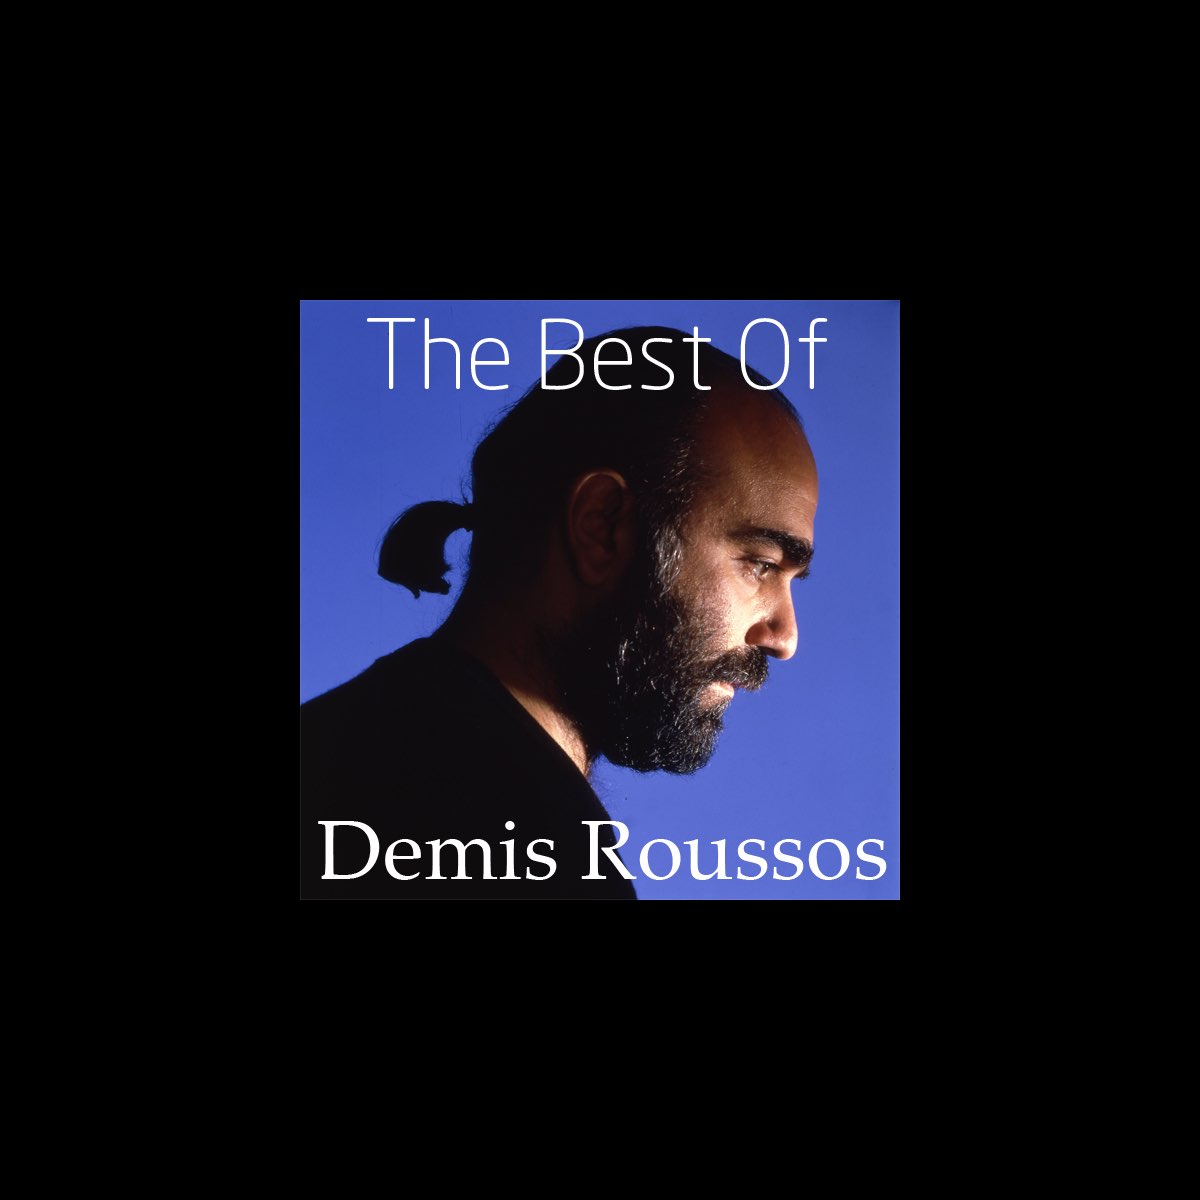 The Best of Demis Roussos by Demis Roussos on Apple Music